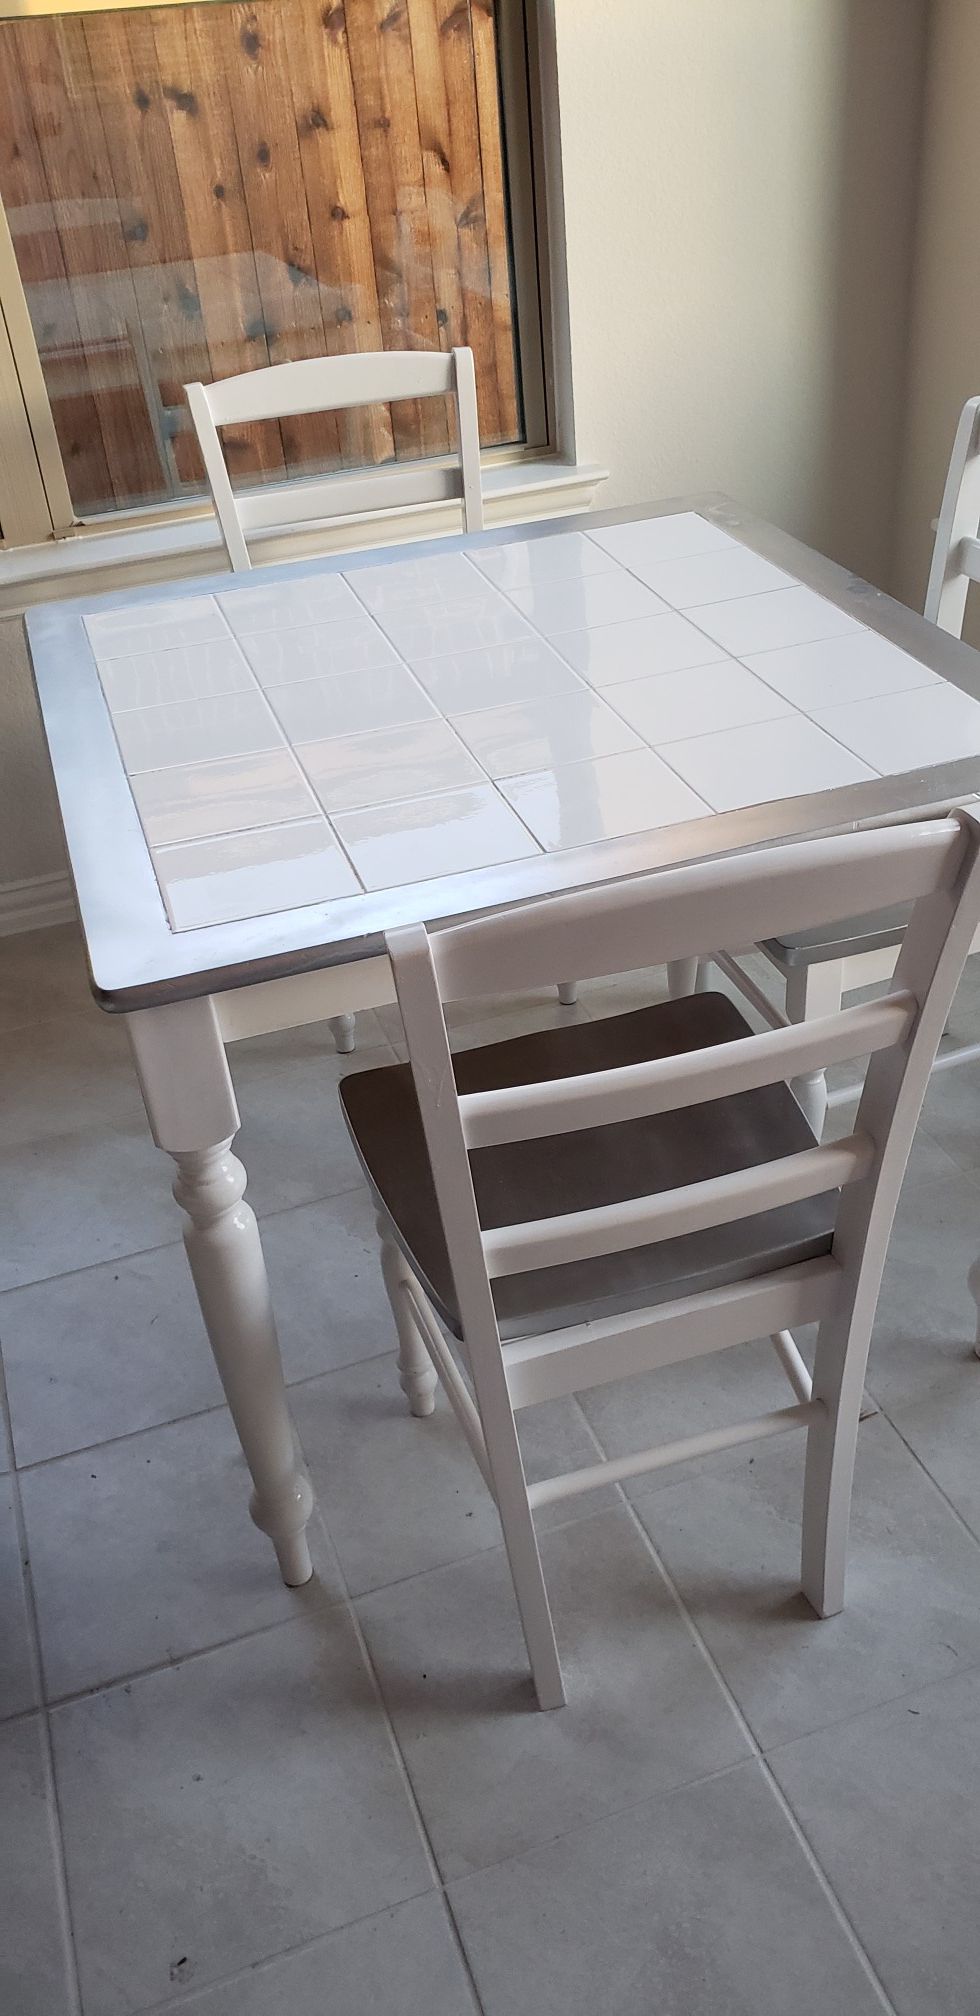 Small dinning kitchen table with 4 chairs